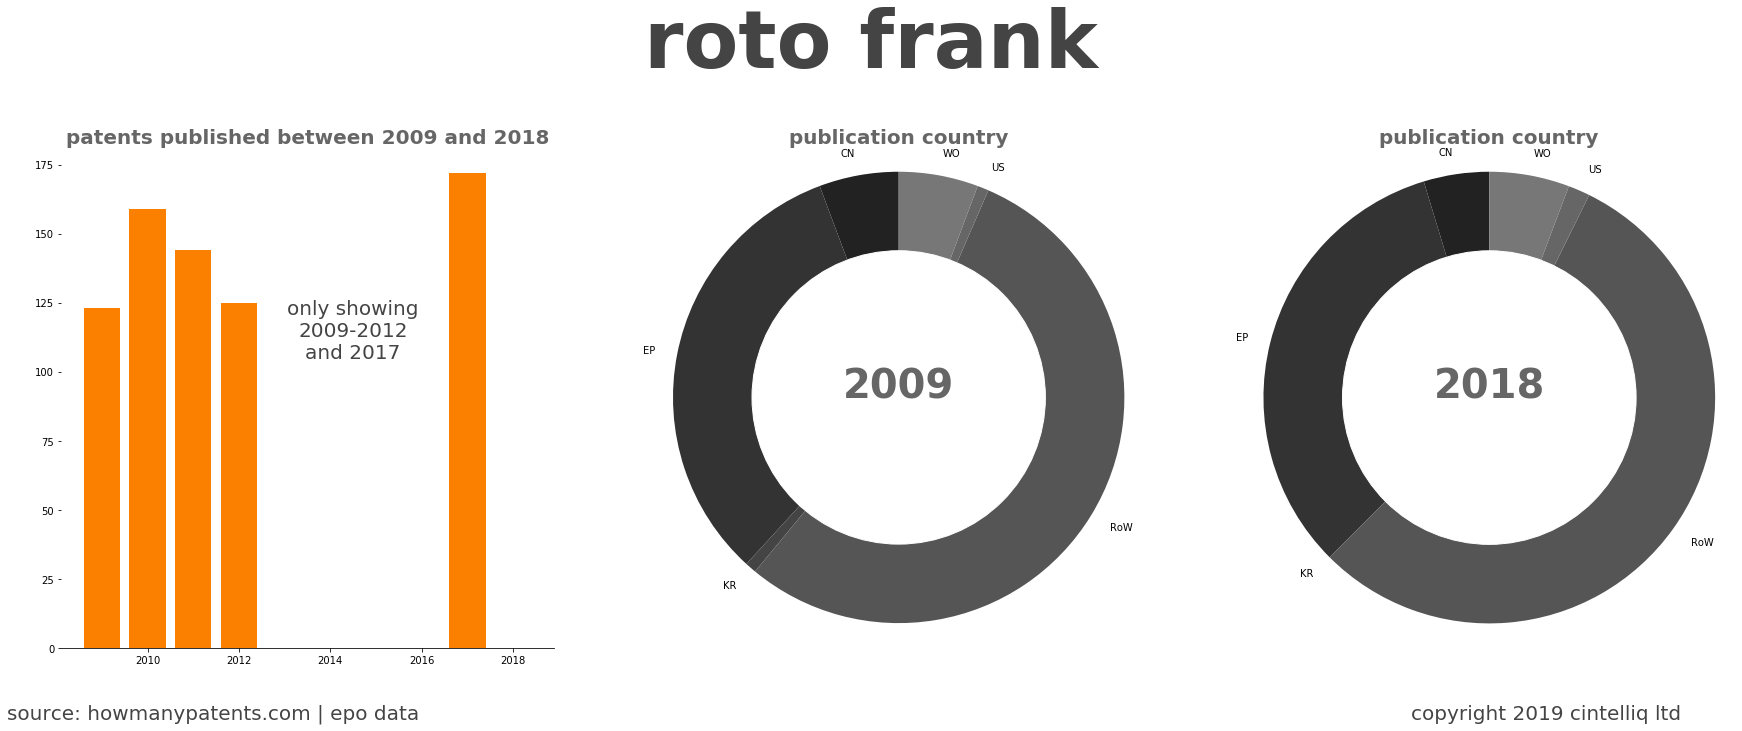 summary of patents for Roto Frank